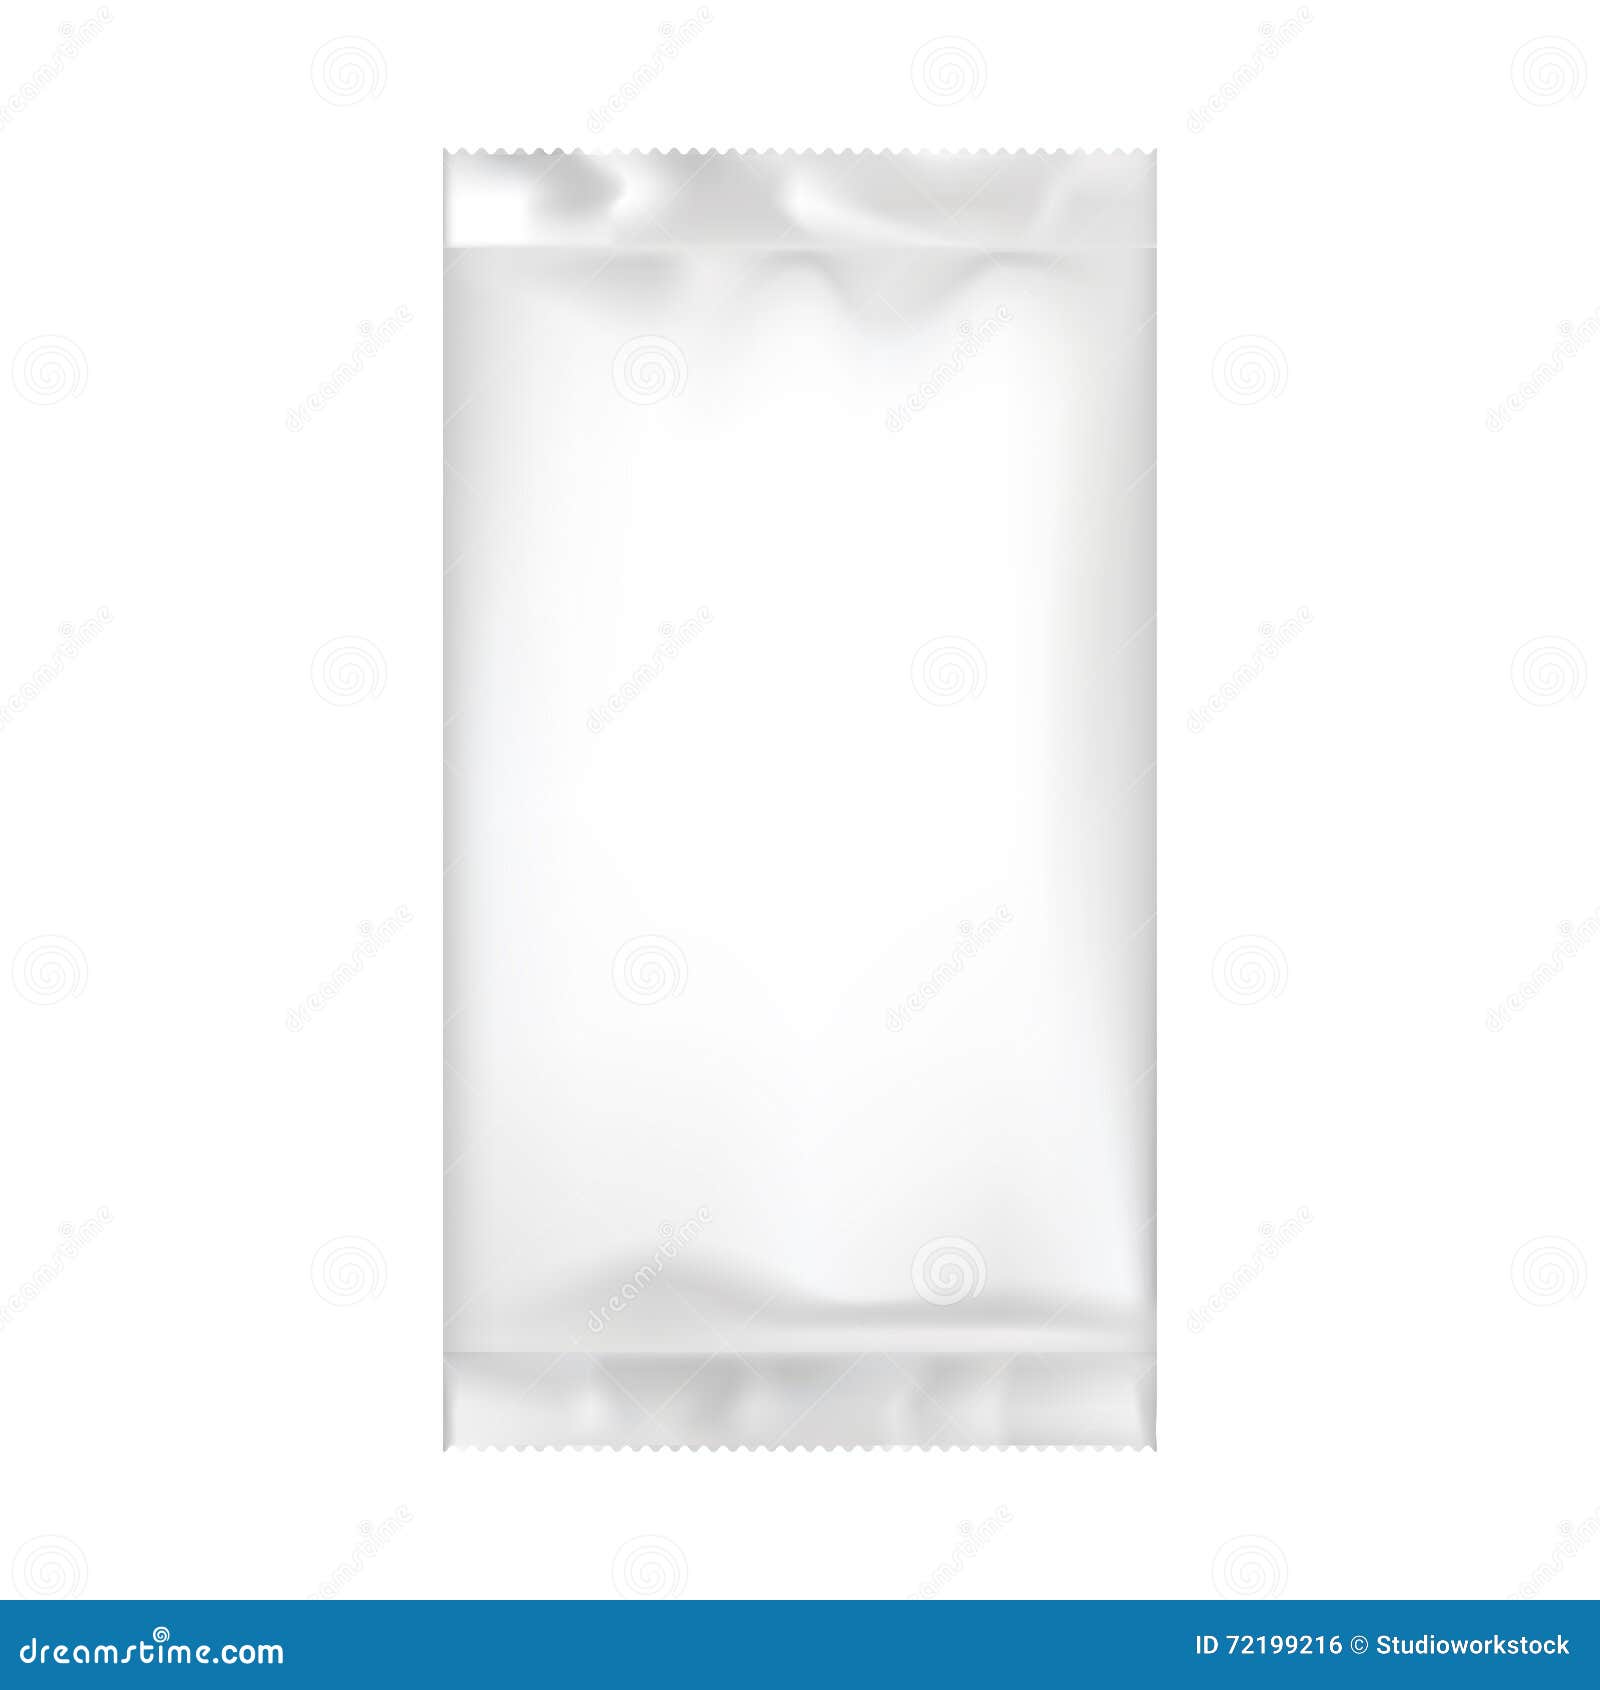 Download Blank Packaging Template Mockup Isolated On White. Stock ...